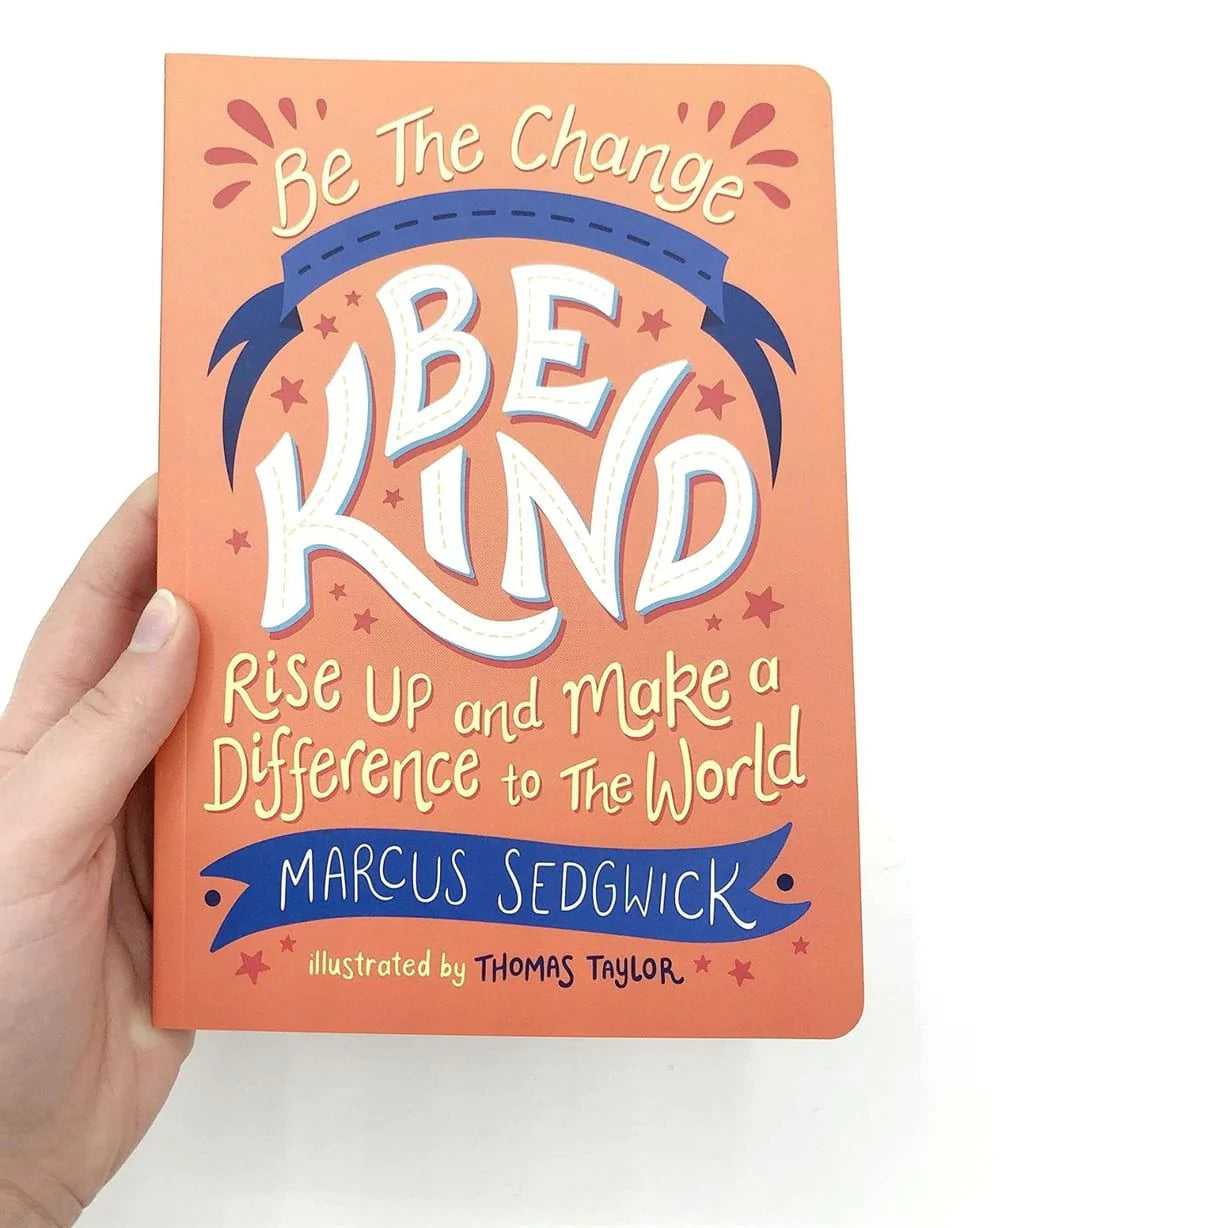 Our Bookshelf Print Books Be The Change - Be Kind : Rise Up and Make a Difference to the World